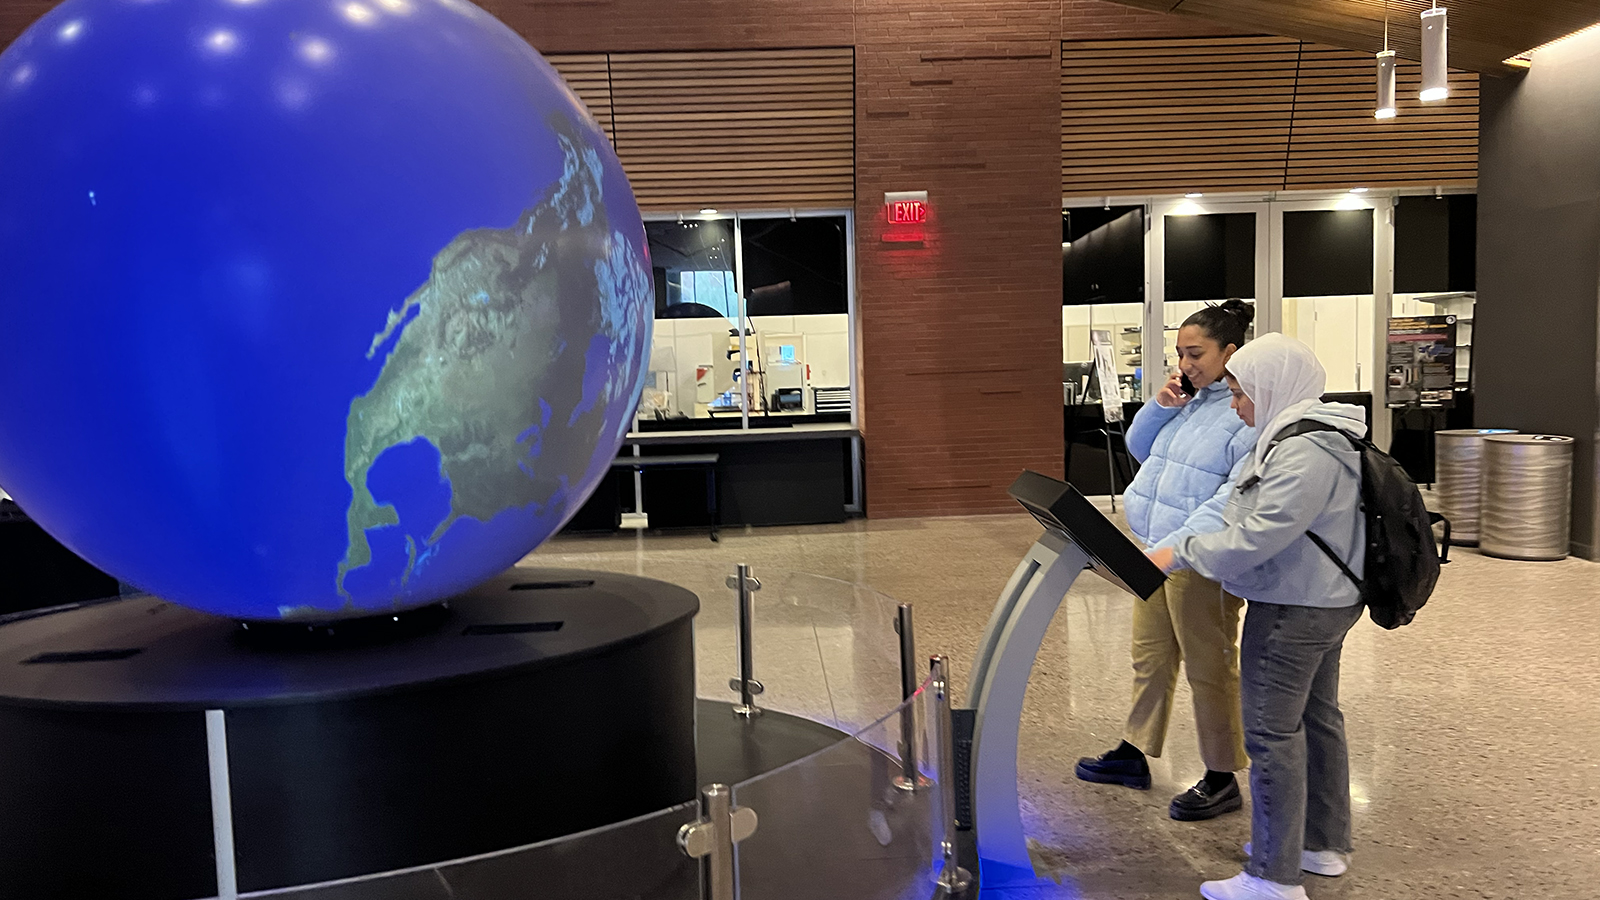 Students explore earth and science building at ASU